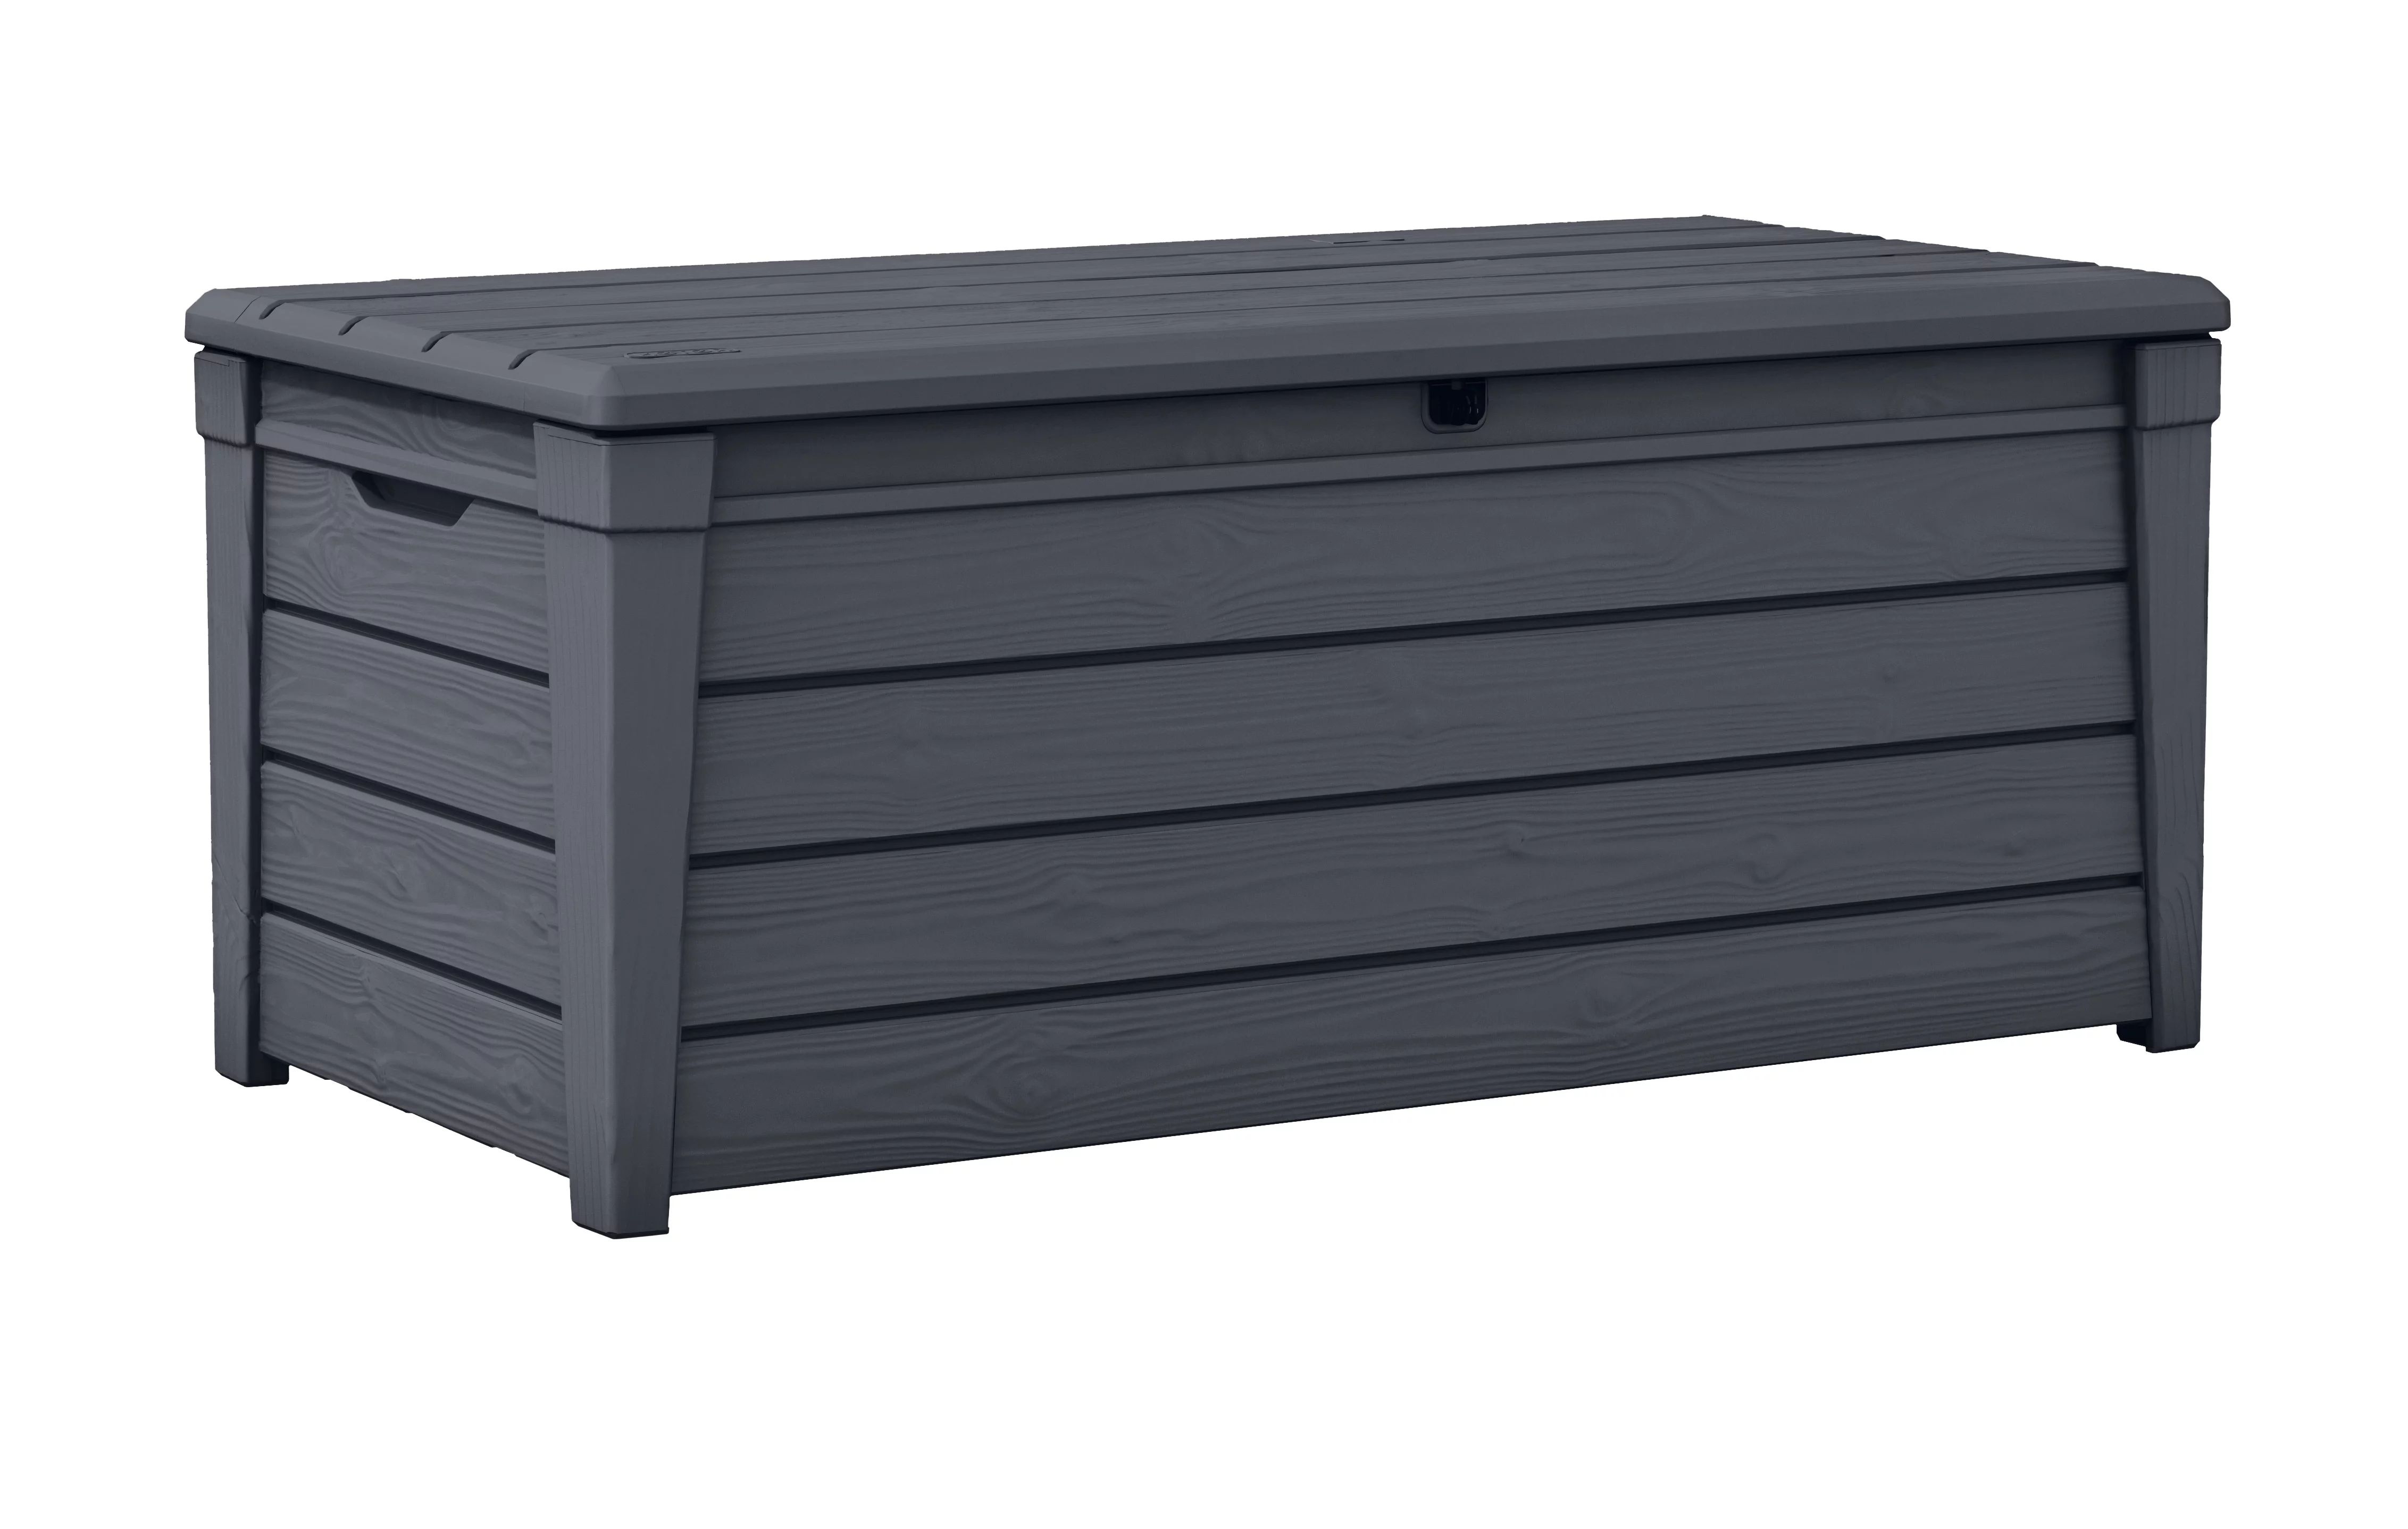 Keter Brightwood Outdoor Plastic Deck Box, All-Weather Resin Storage, 120 Gal, Anthracite Gray | Walmart (US)